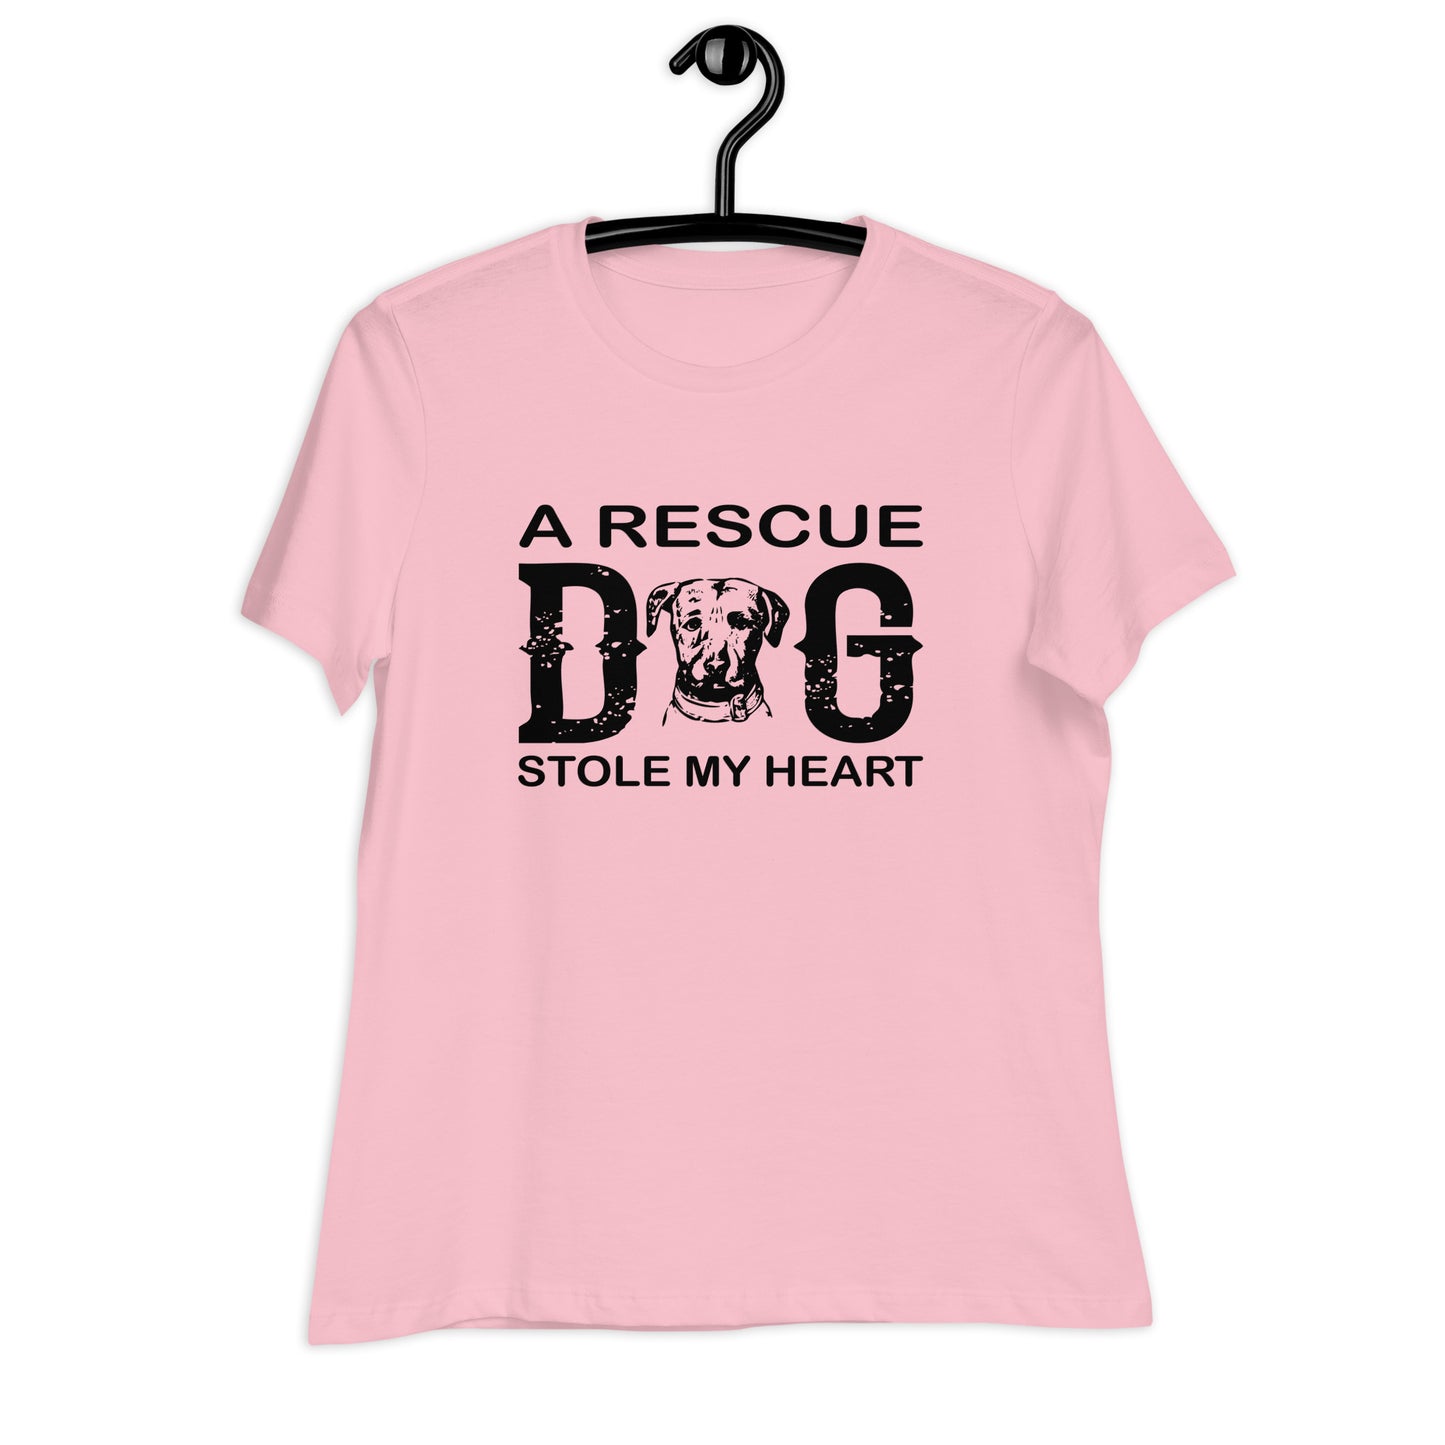 Dog Saying Shirts for Women - A Rescue Dog Stole My Heart